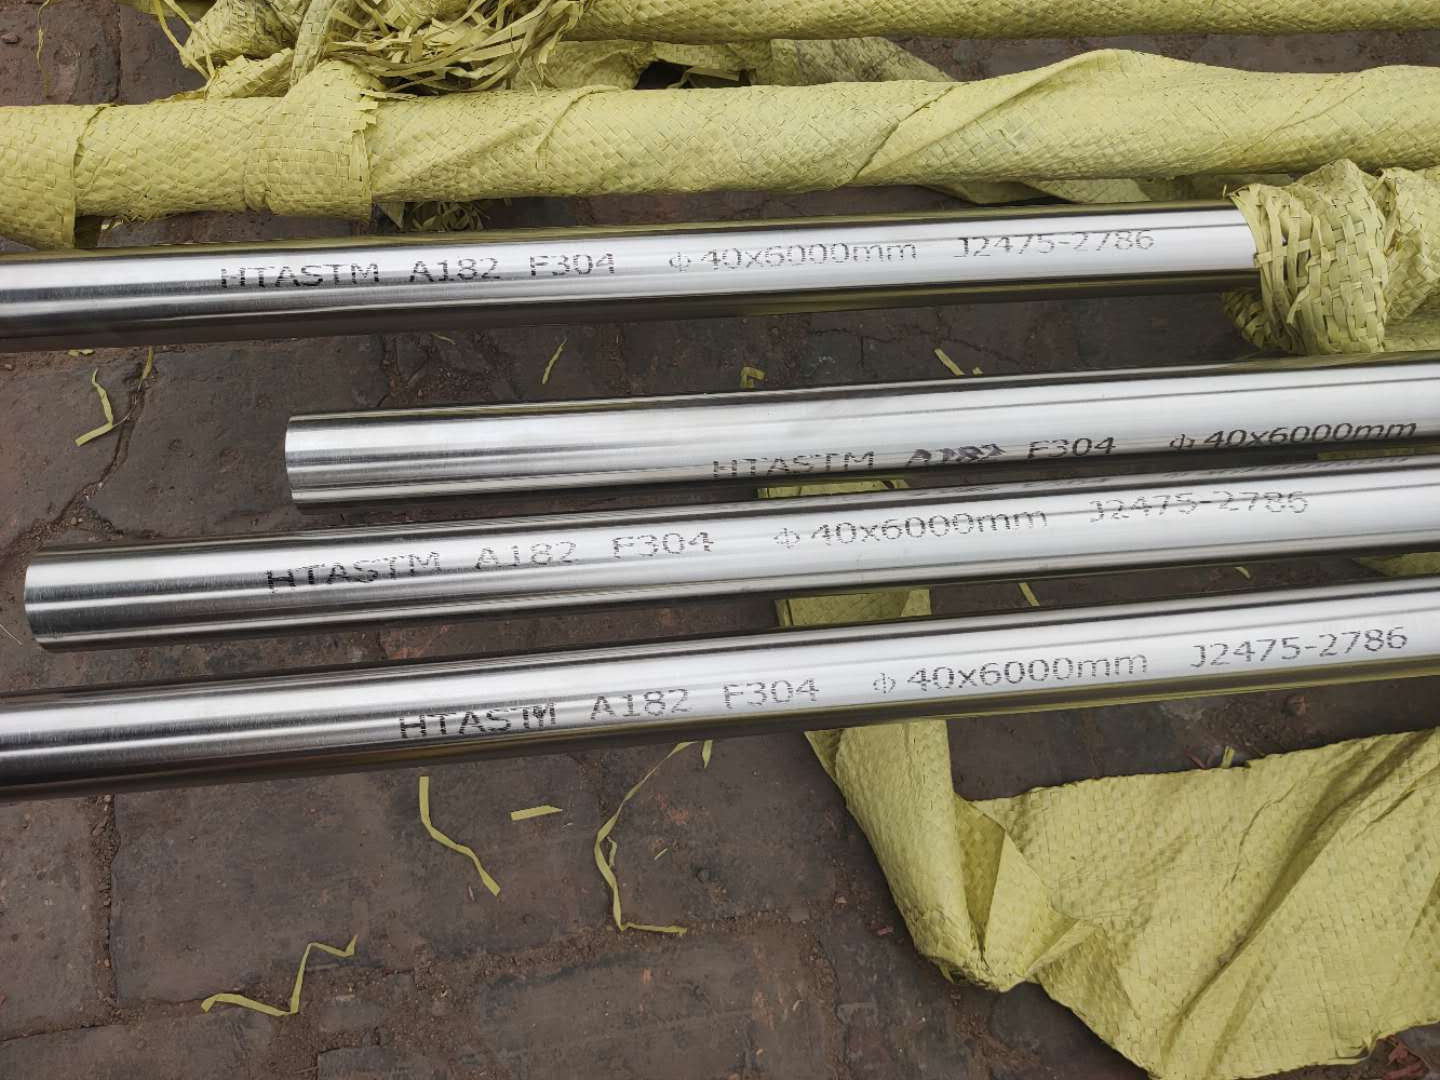 Stainless Steel A182 F304 forged rod bright φ40mm